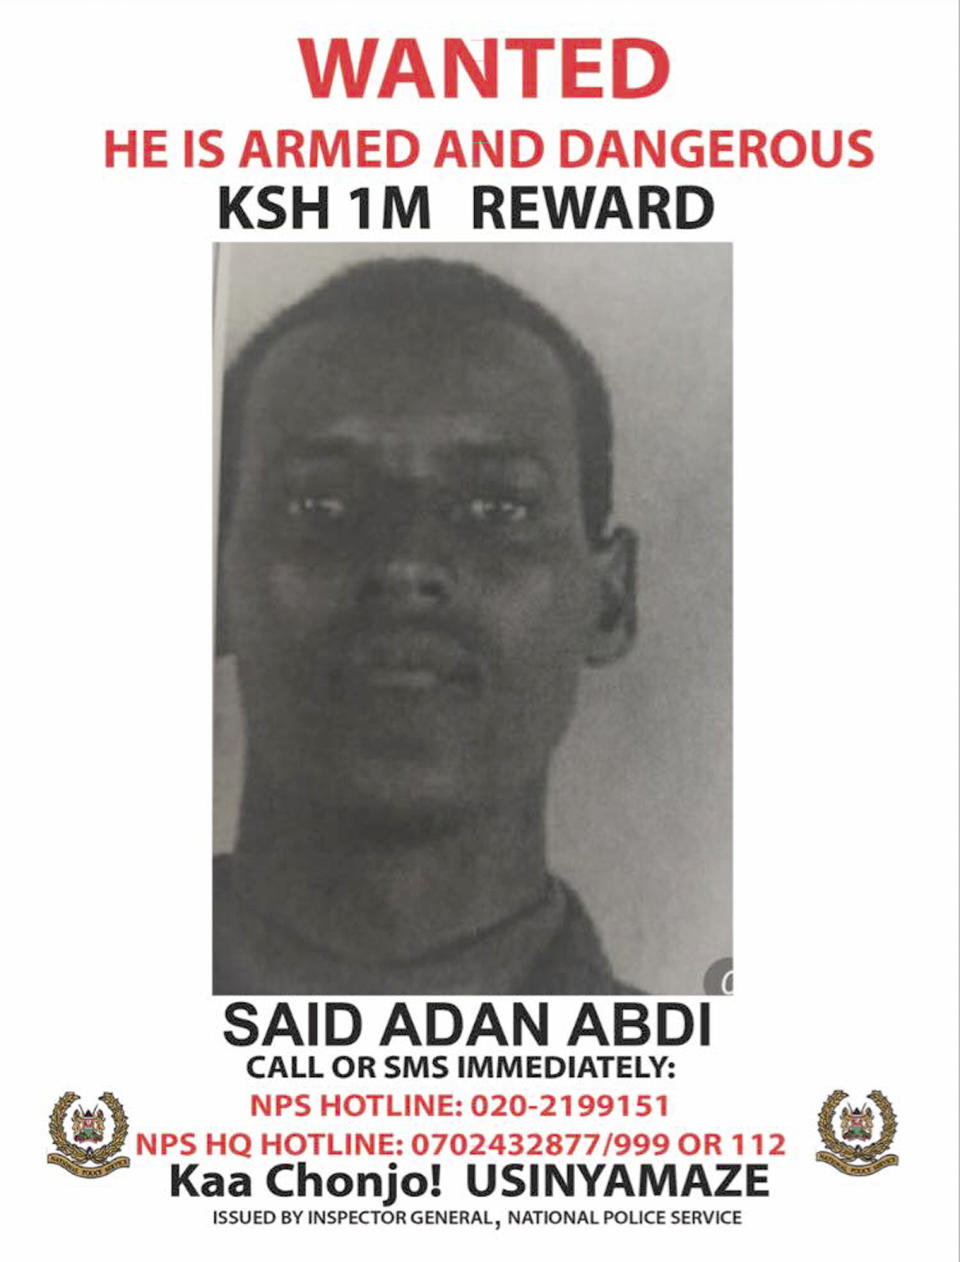 This photo shows a wanted poster issued by Kenya's National Police Service on Saturday, Nov. 24, 2018 showing Said Adan Abdi who is wanted in connection with the kidnapping of 23-year-old Italian volunteer Silvia Costanza Romano in Kenya. Kenyan police have identified three suspects in the kidnapping of the Italian woman and are offering a reward of one million shillings ($9,750) for information leading to their arrest. Swahili reads "Be alert, don't stay quiet". (Kenya National Police Service via AP)